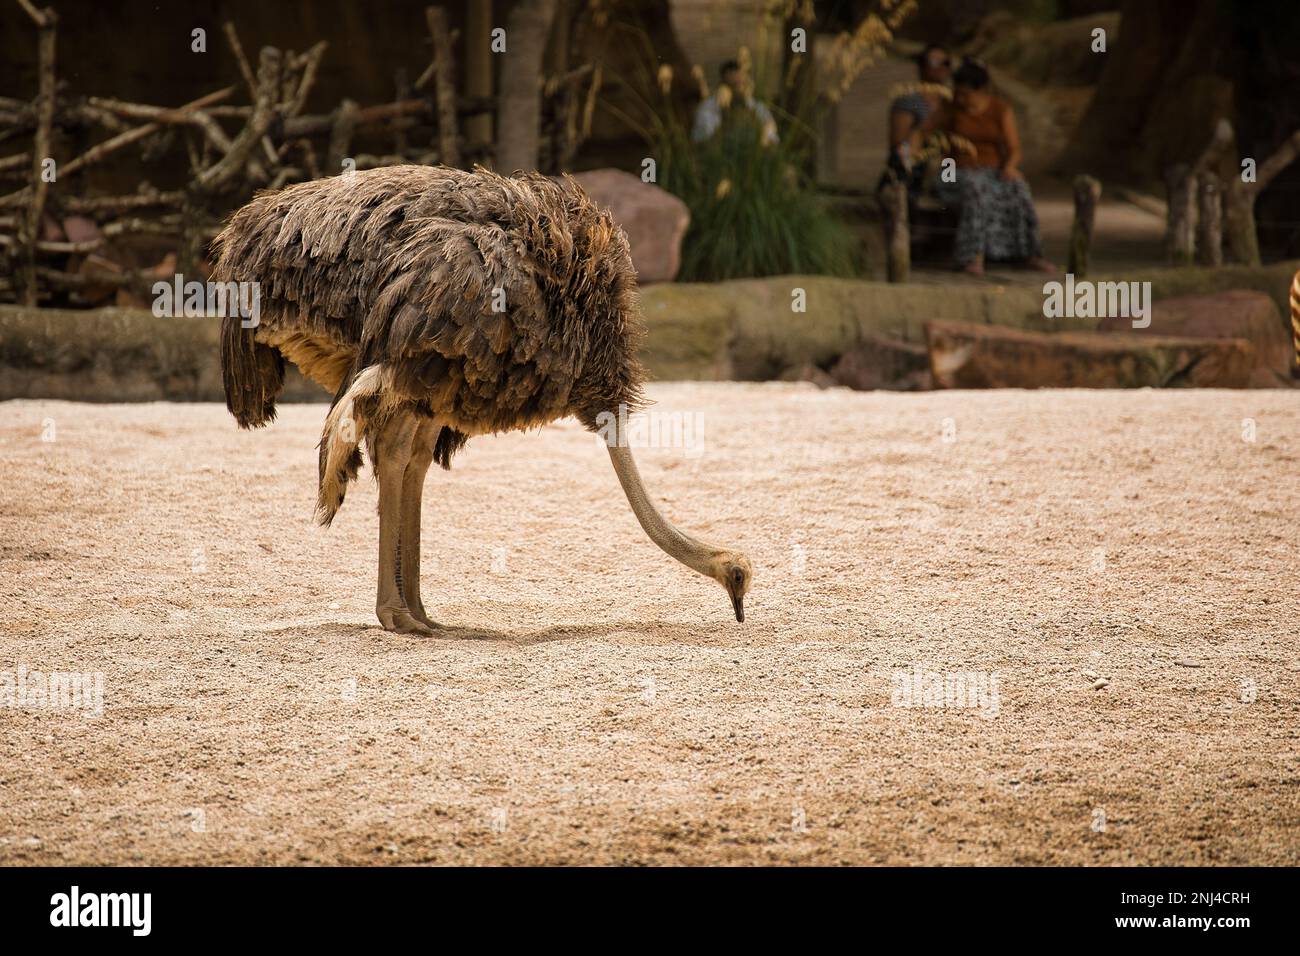 Full body long distance shot of an ostrich pecking in the sand. Stock Photo